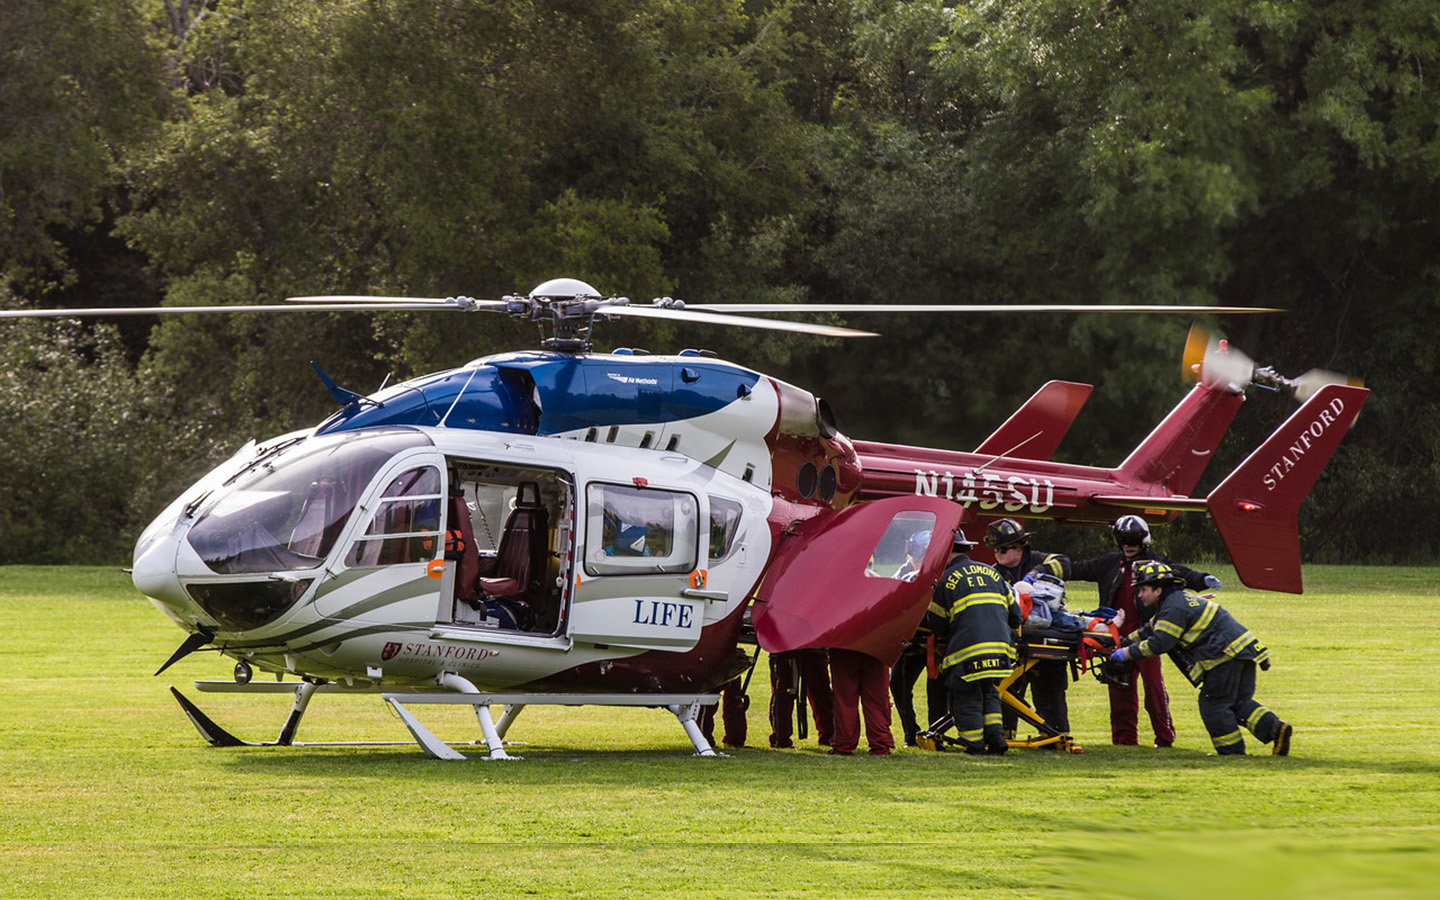 Life Flight team transporting patients to the hospital